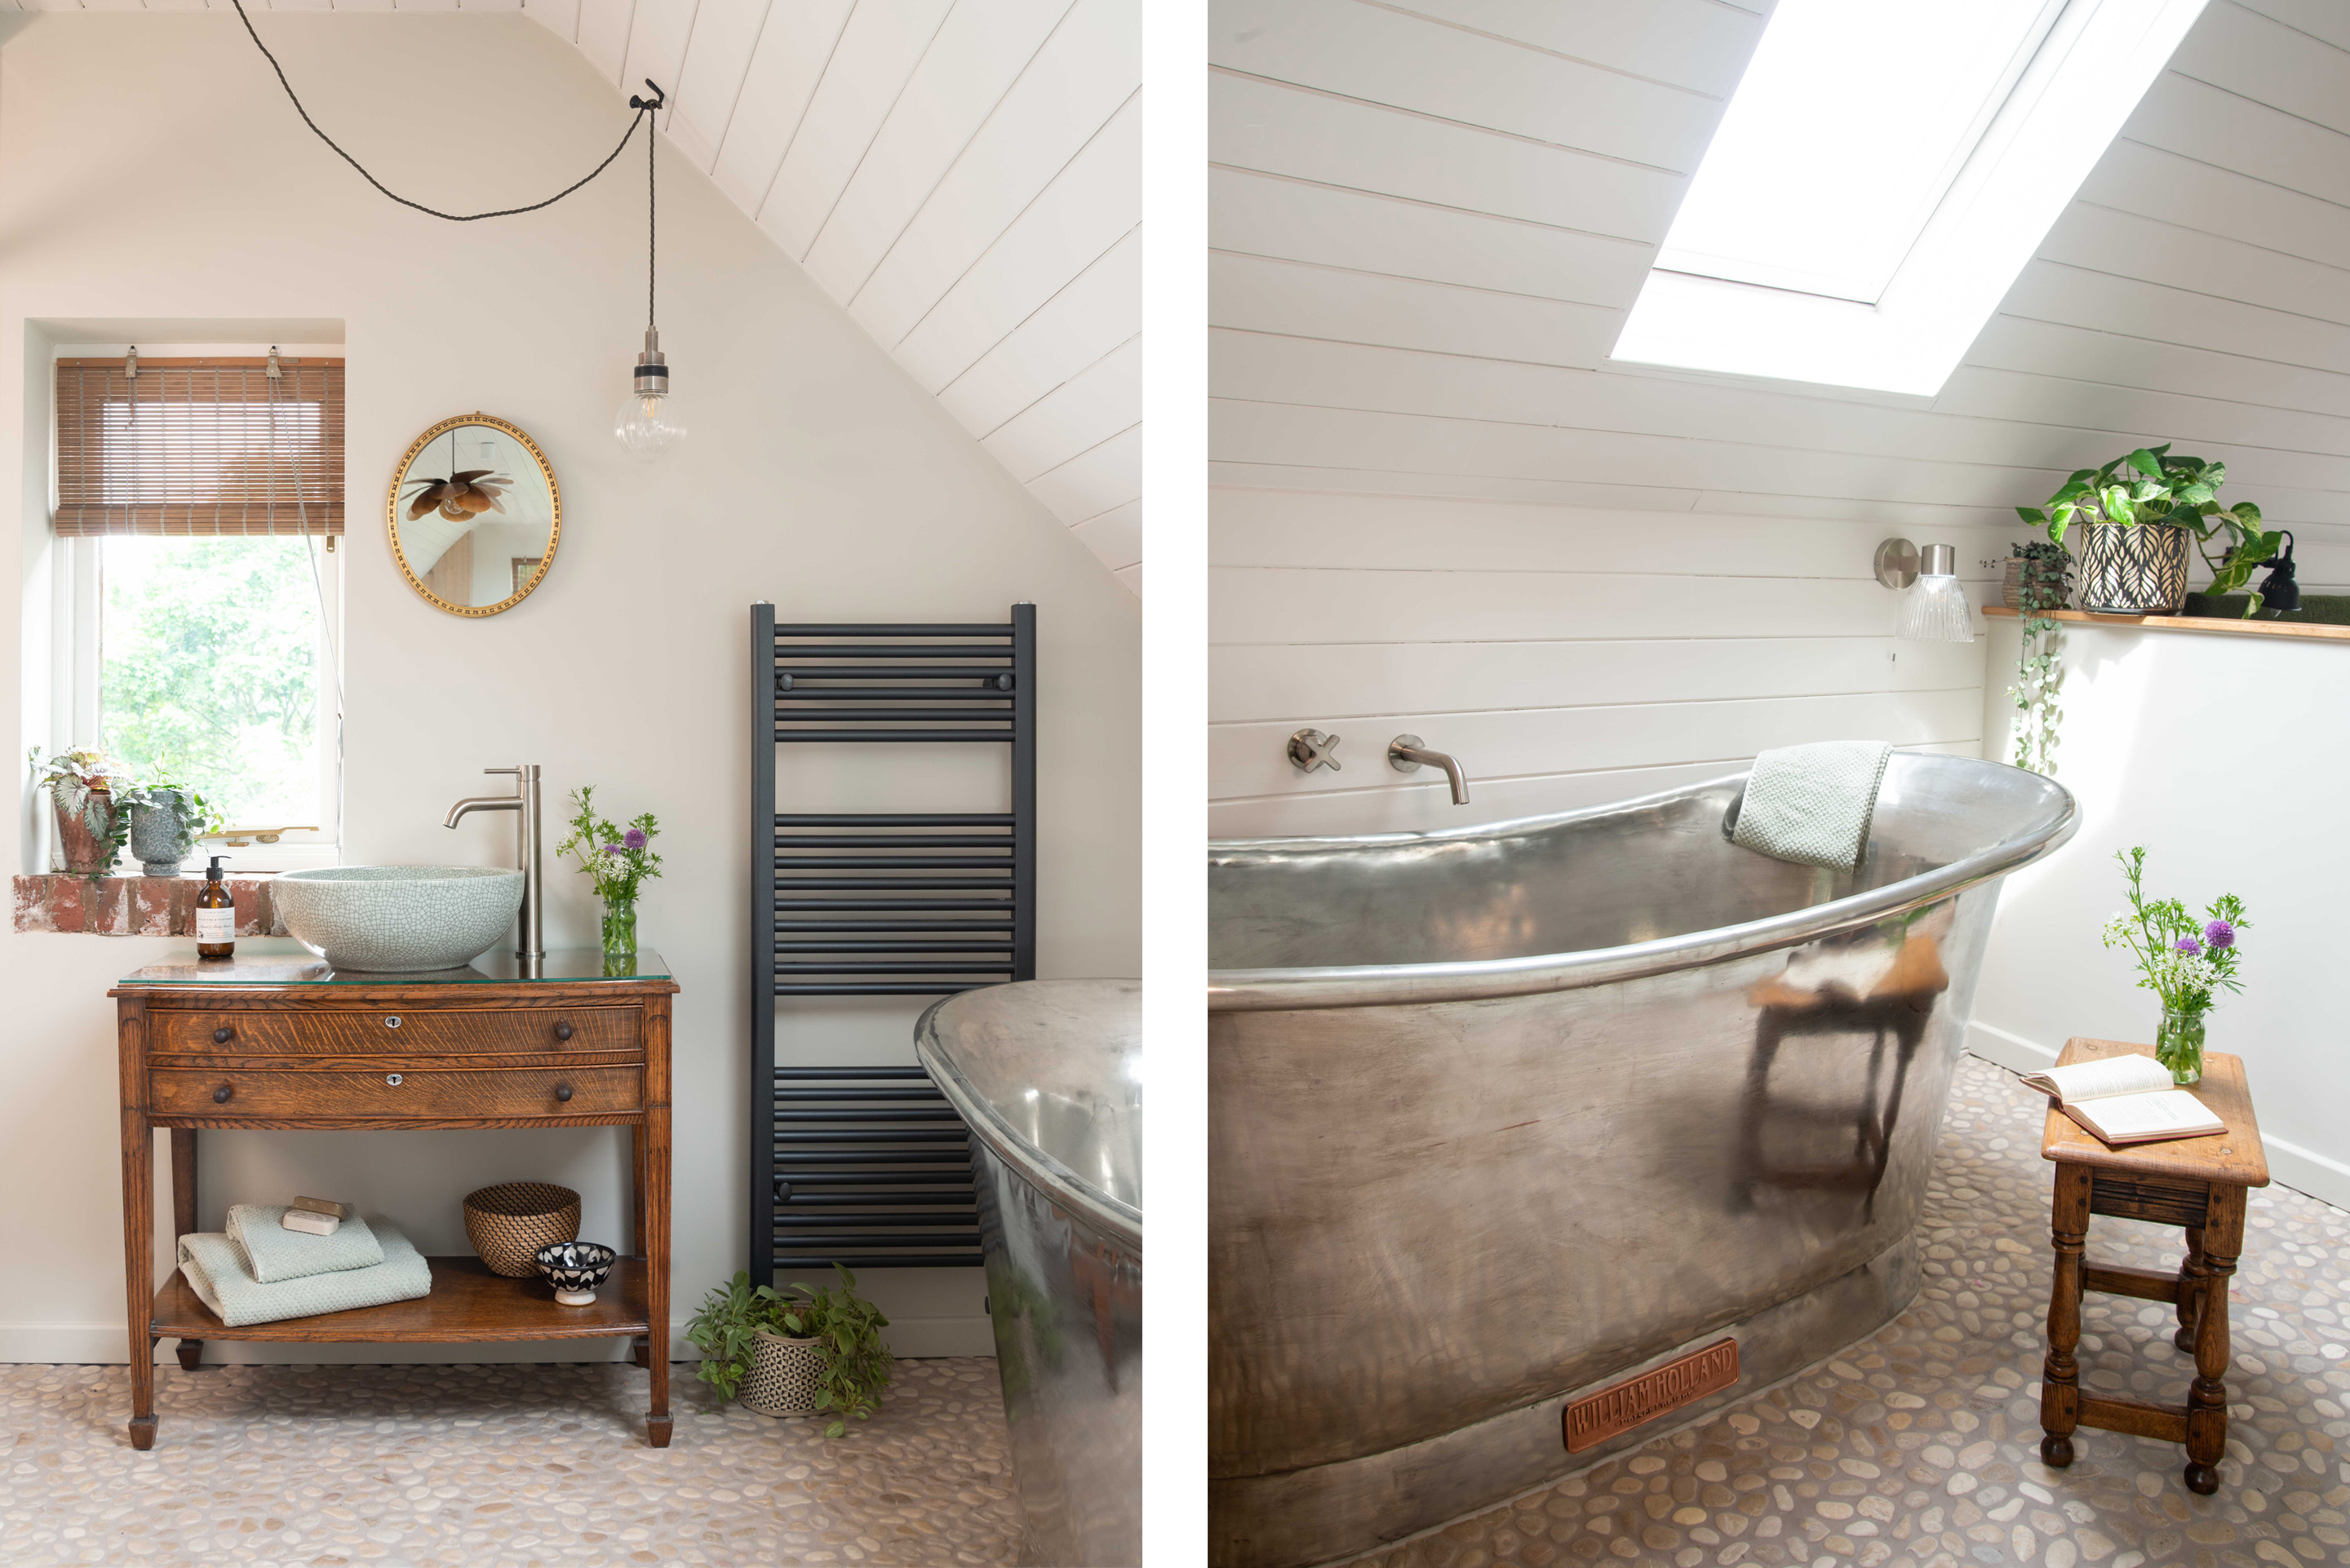 a bathroom in a converted loft space, with quirky pebble floor, a william holland freestanding tin bateau bath and vintage drawers repurposed as a vanity unit with crackle glaze basin